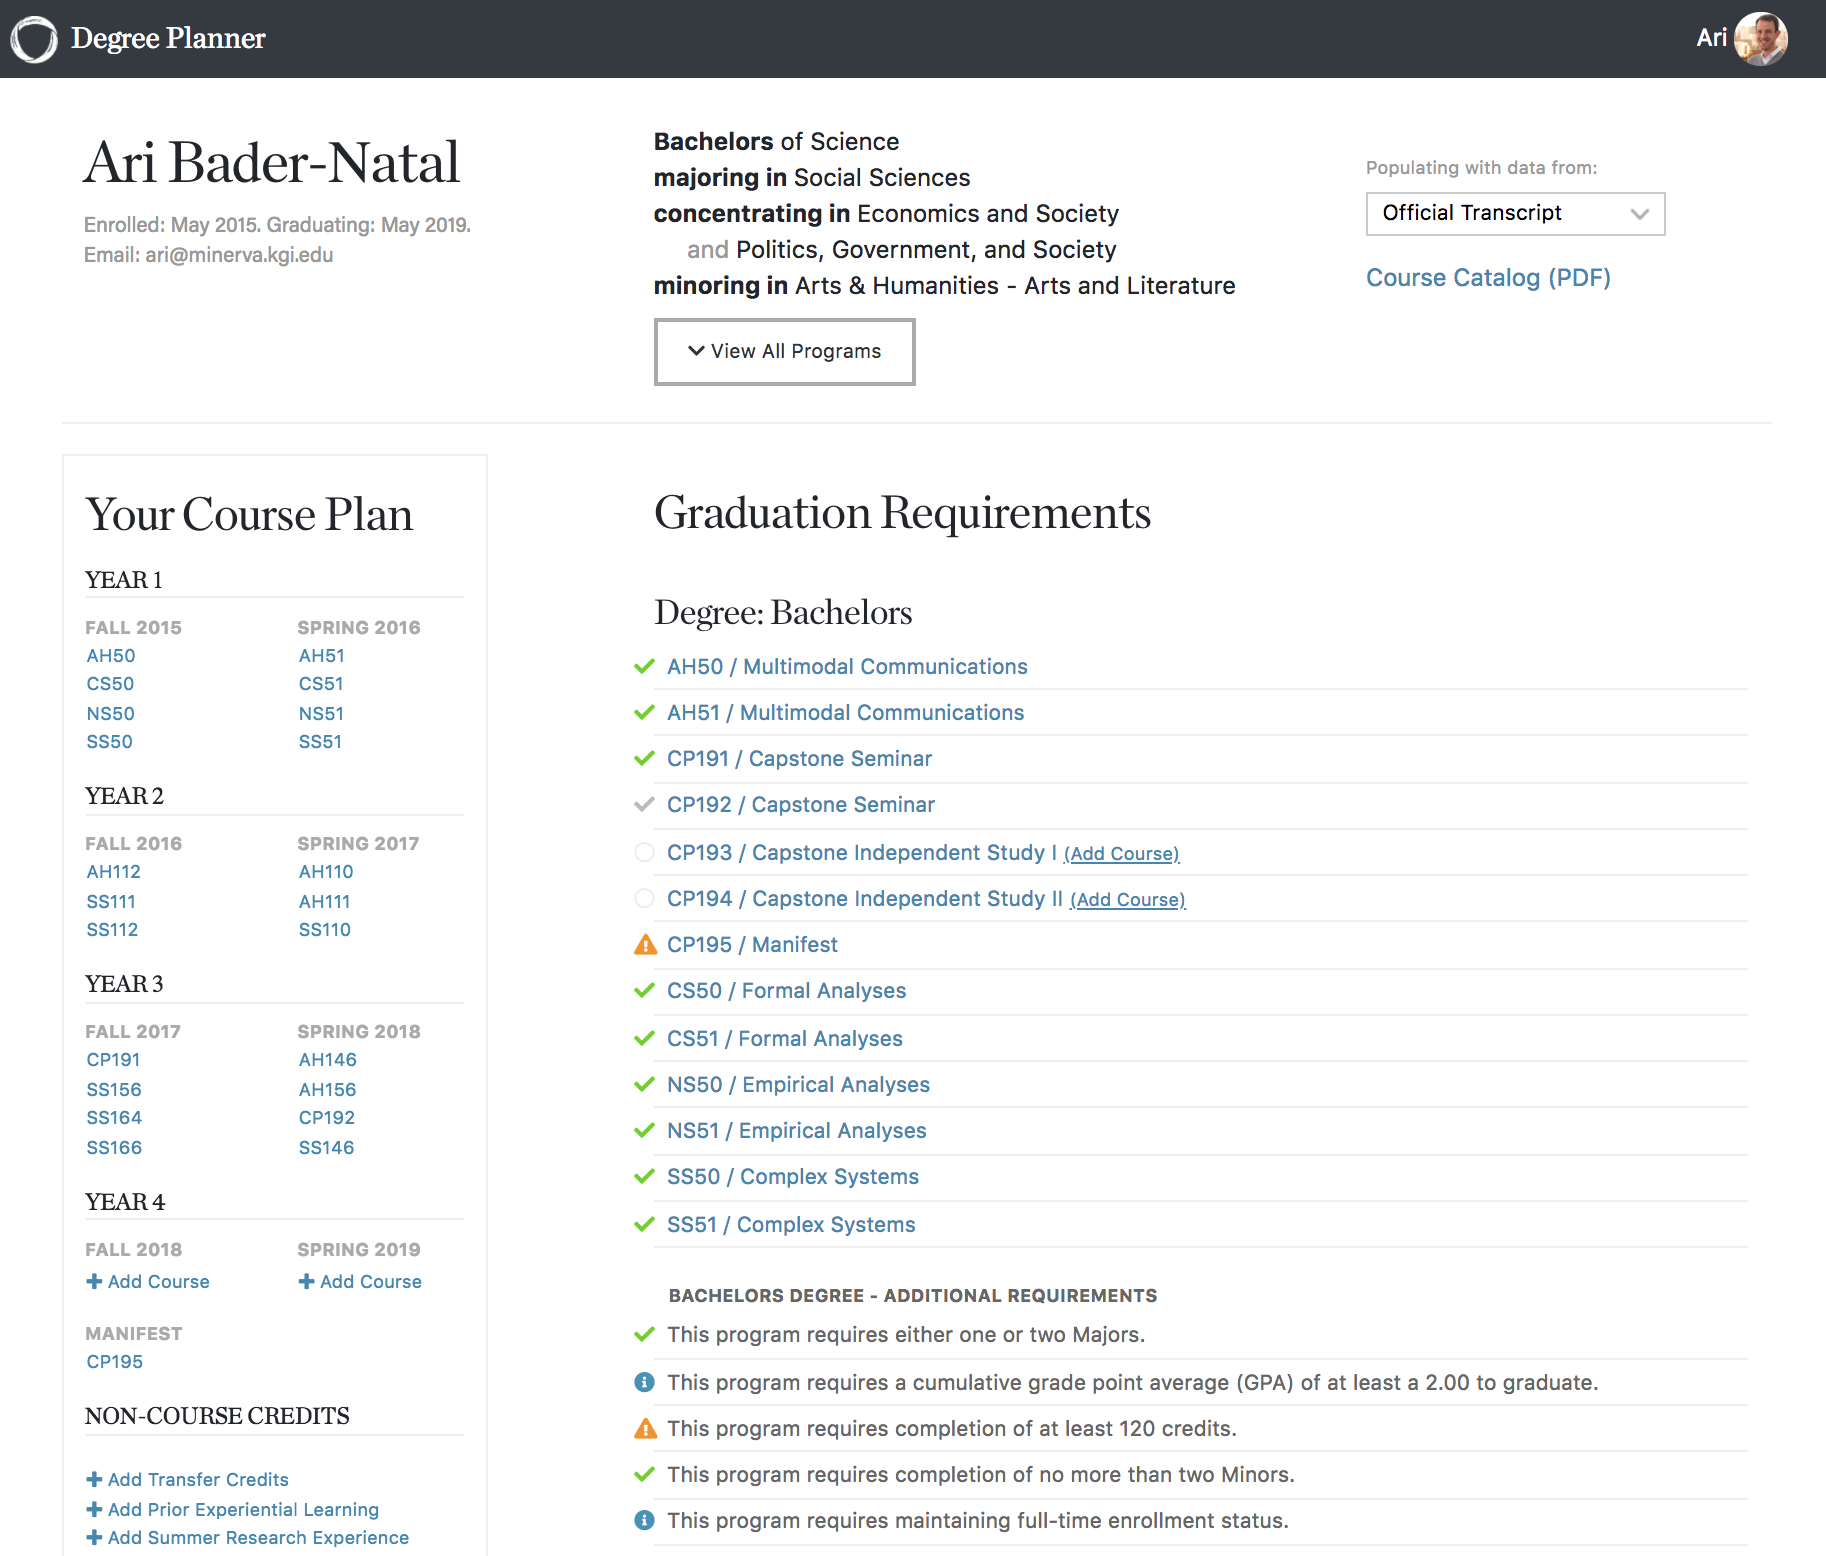 Screenshot of a course plan in the Degree Planner